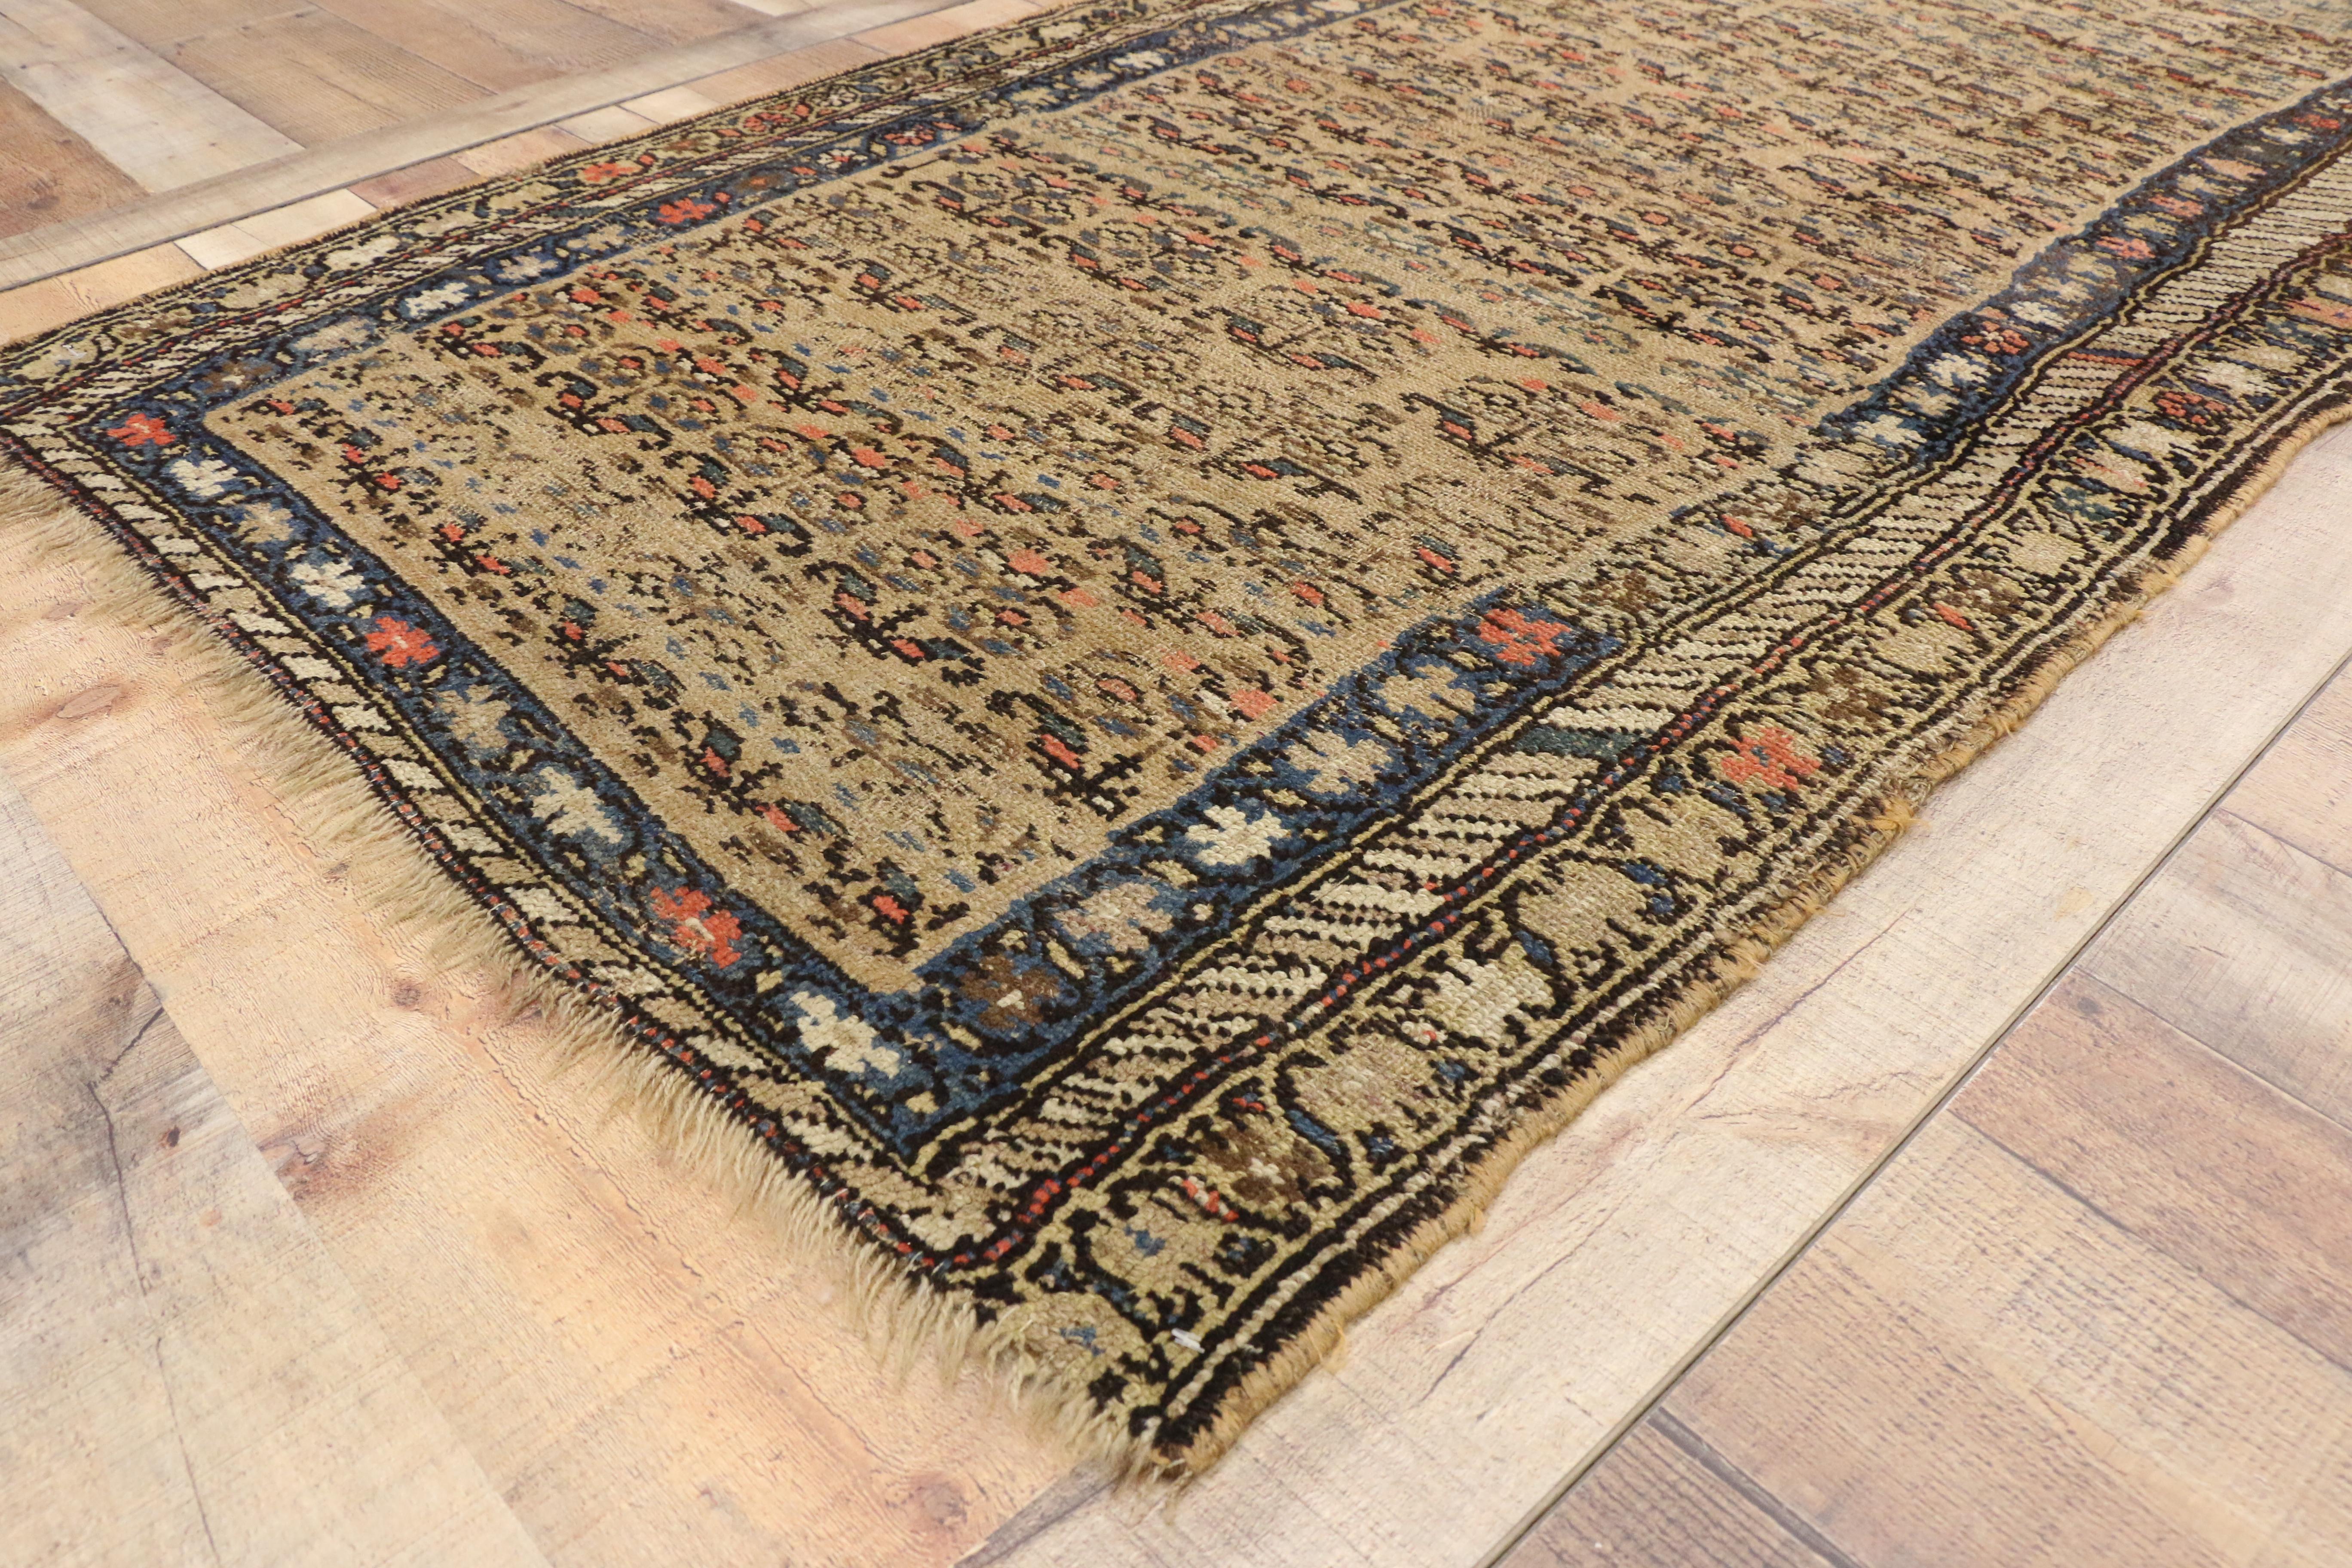 71582, distressed antique Persian Malayer rug with rustic Farmhouse style. This hand-knotted wool distressed antique Persian Malayer rug features an all-over floral lattice pattern overlaid across an abrashed field. The offset rows of stylized